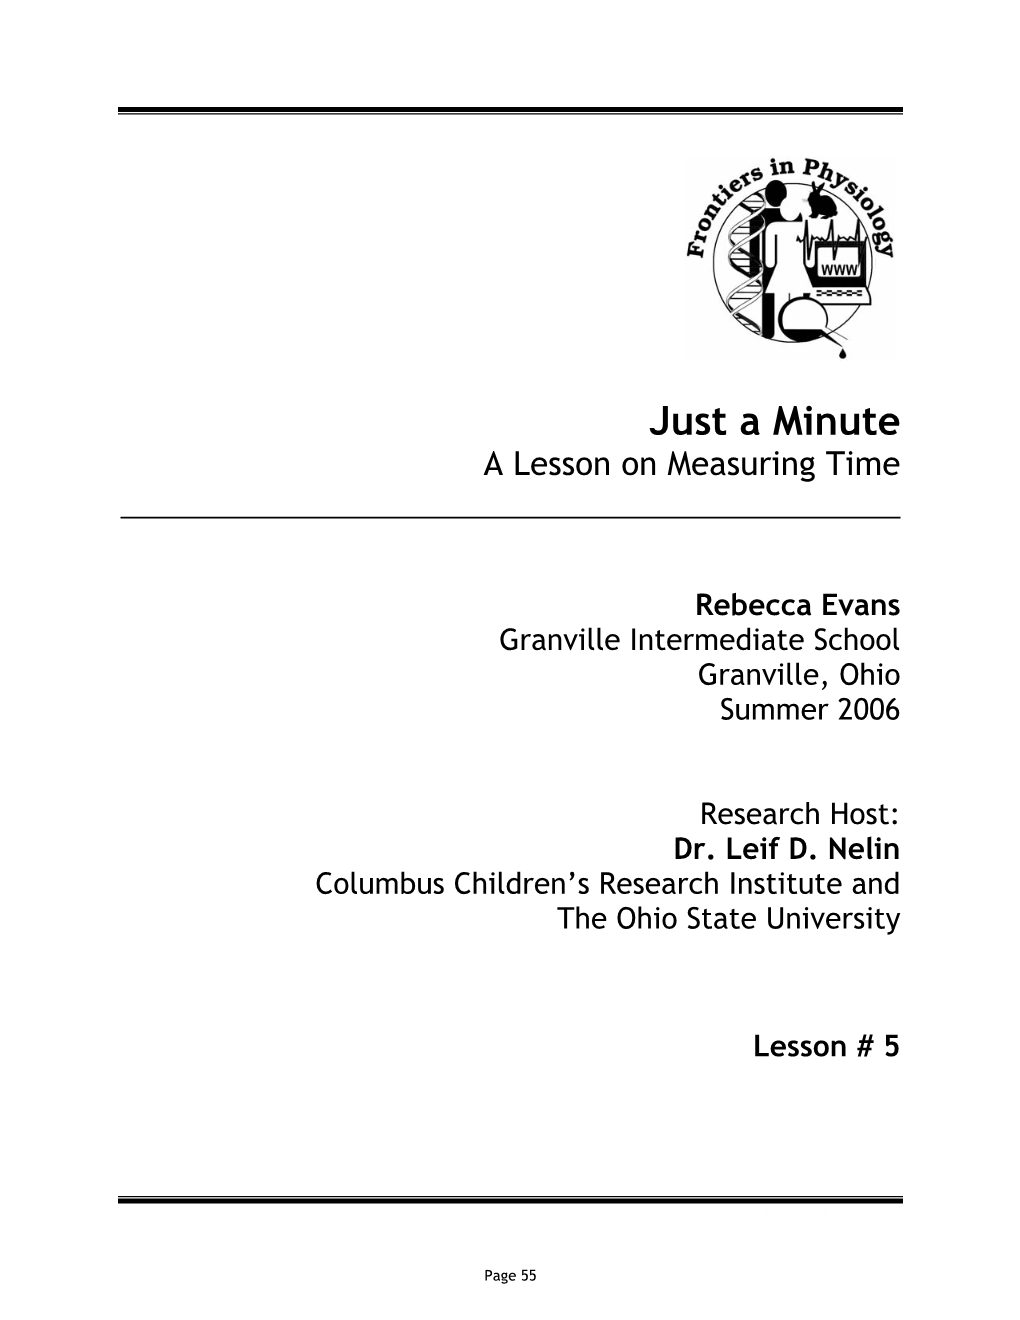 Just a Minute a Lesson on Measuring Time